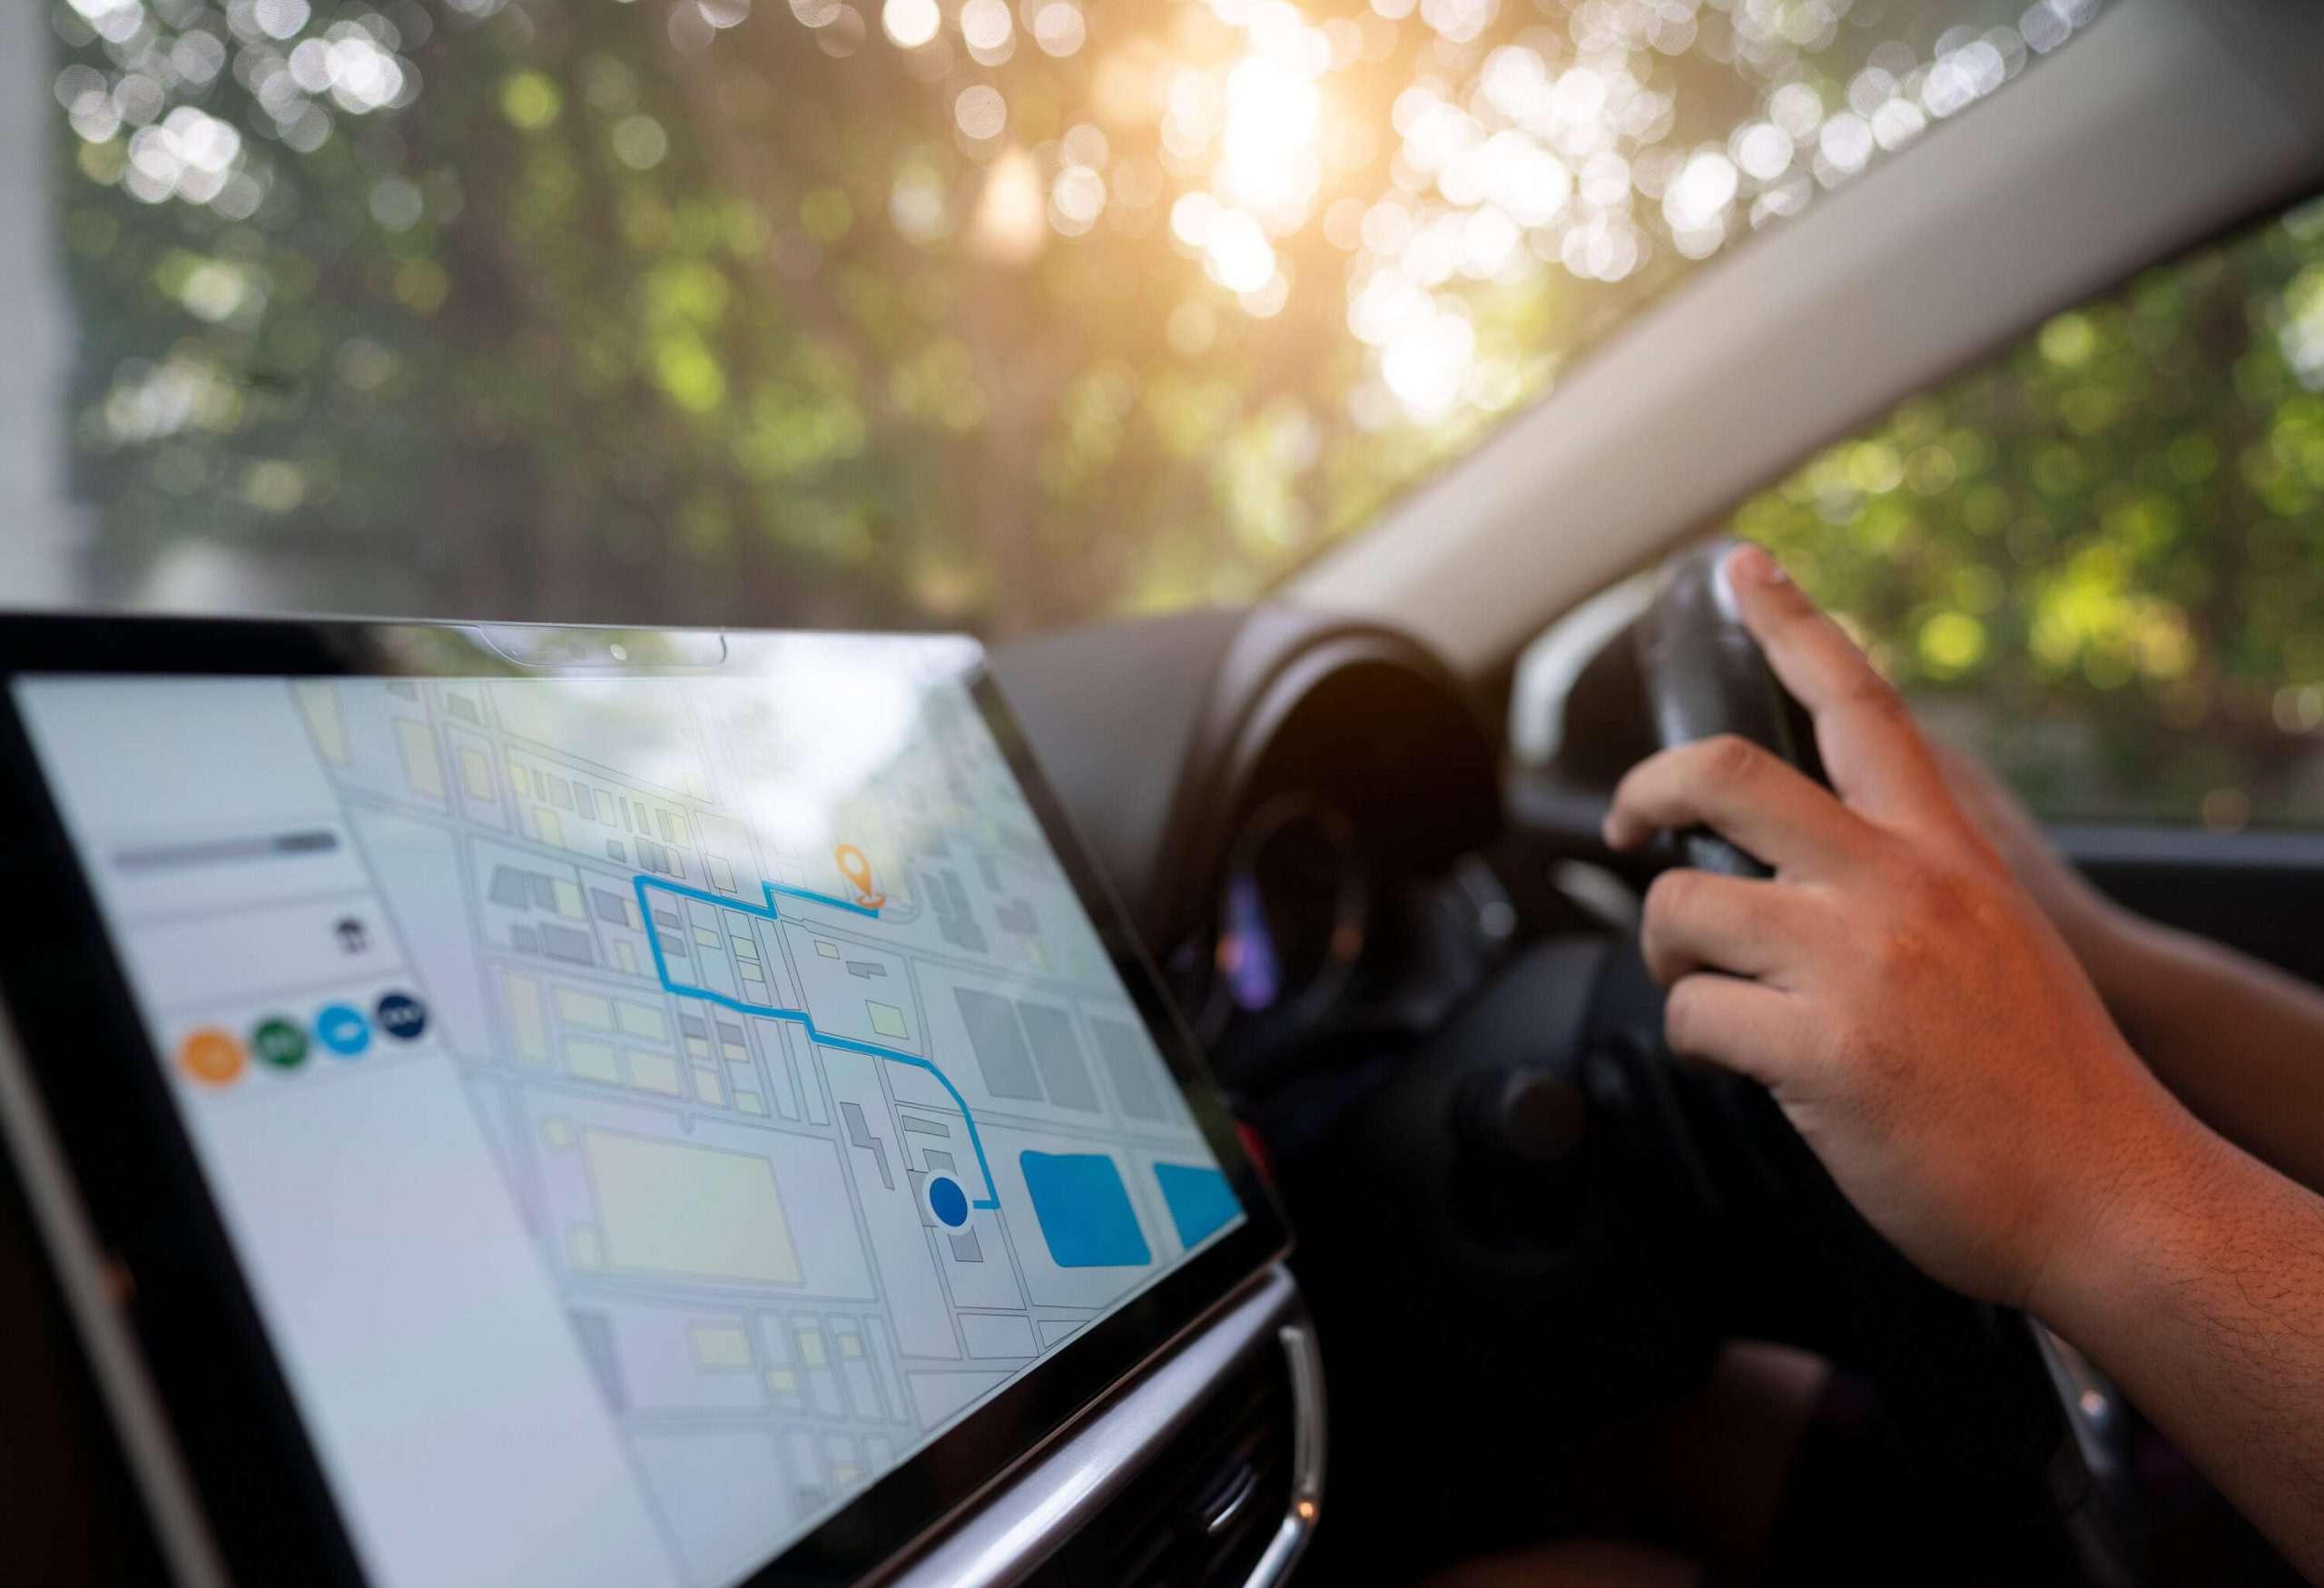 A hand navigates a car's steering wheel beside a screen with a GPS map.